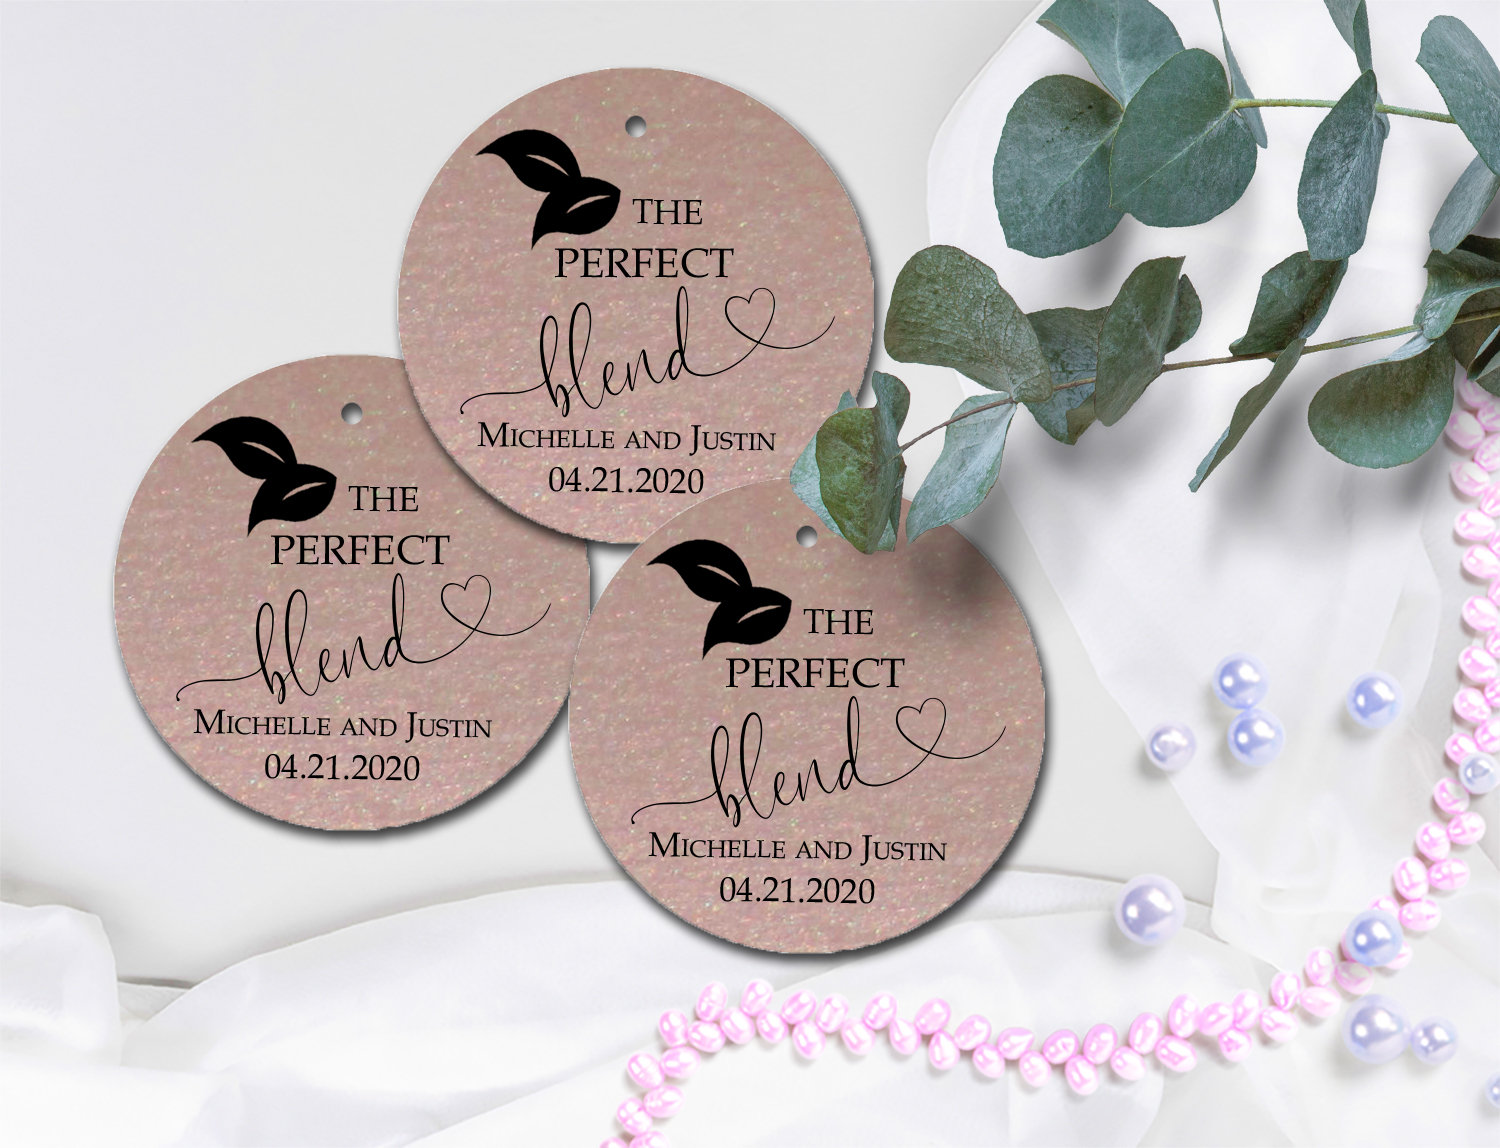 Tea Wedding Favor Tags - The Perfect Blend - Love Is Brewing Tags For Guests - Lavender Thank You Gift